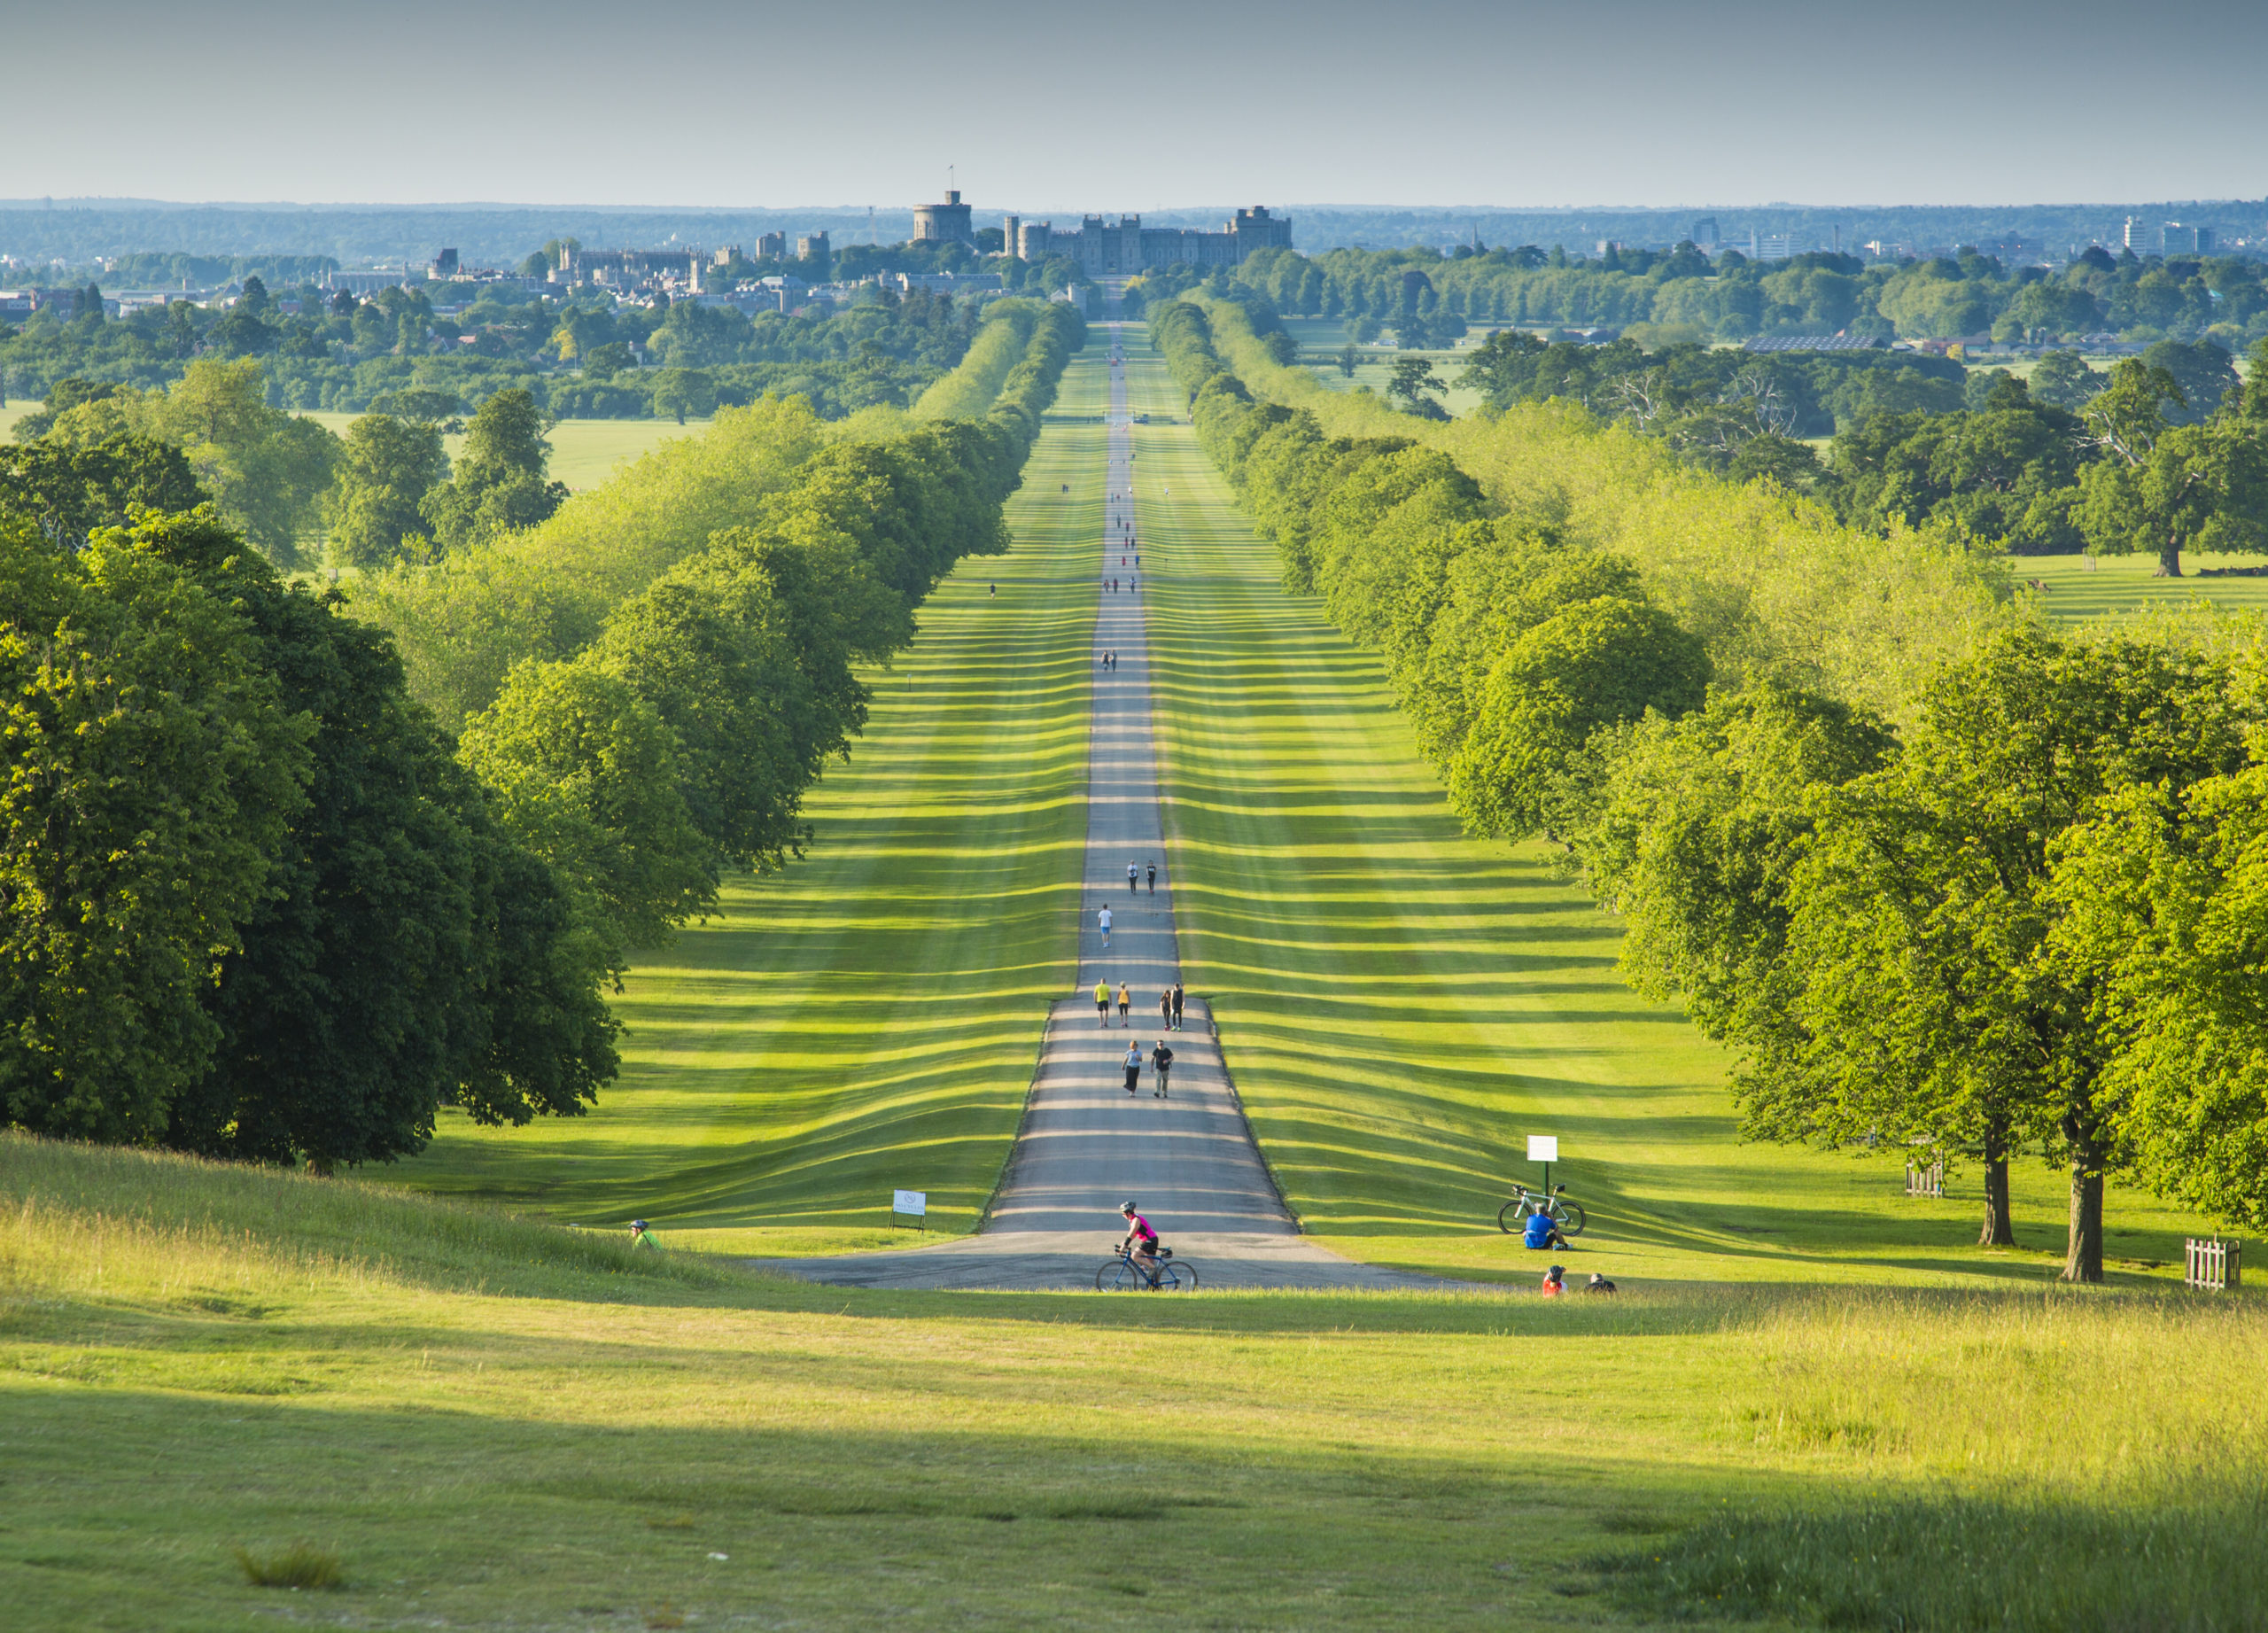 A photograph of The Long Walk at Windsor Great Park.